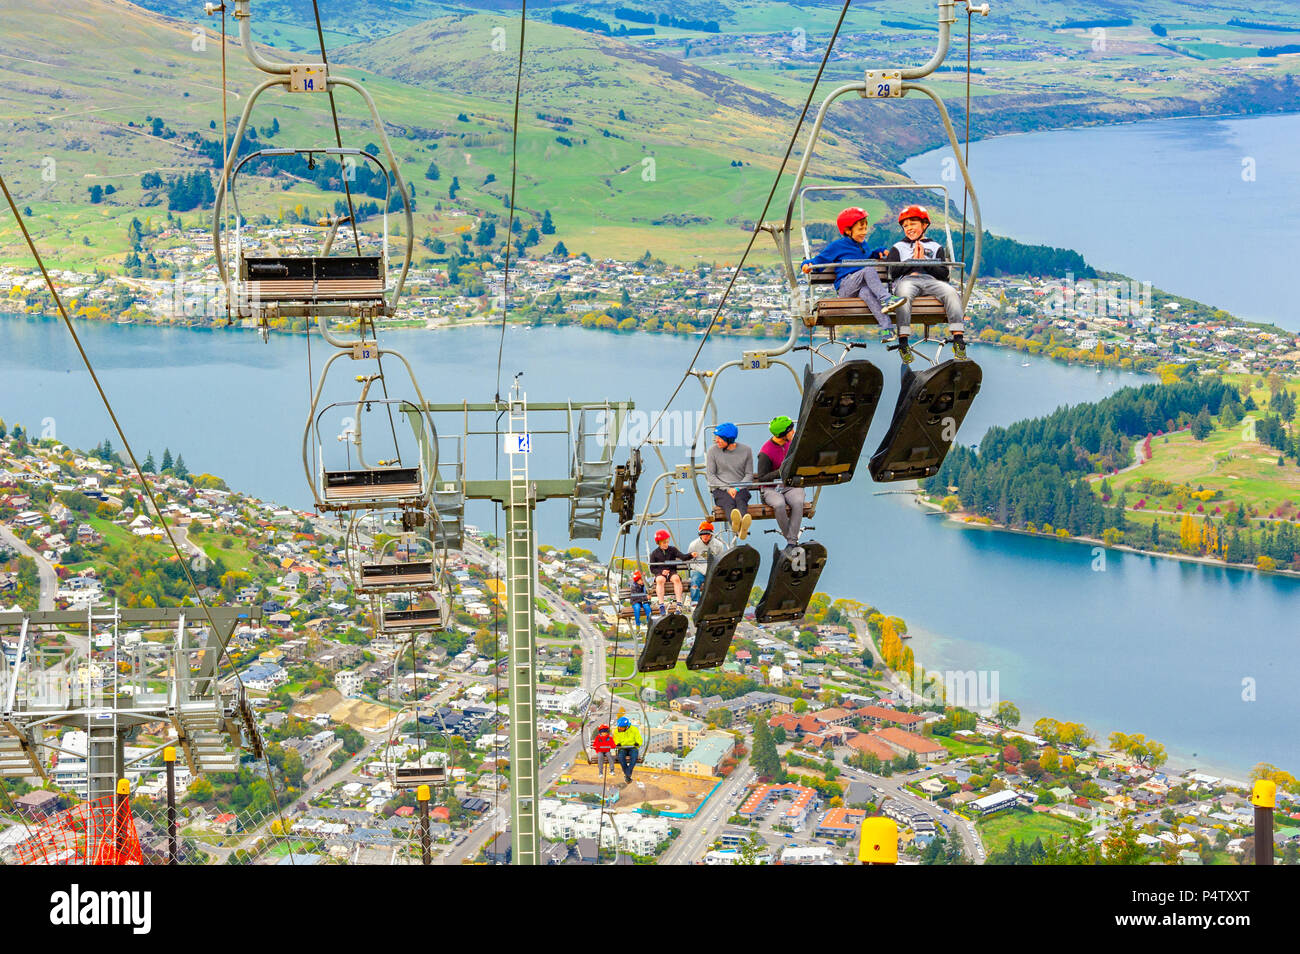 Queenstown, NZ – April 15, 2018: Fun riders with their carts on a cable chair lift going up the hill top for a luge ride with views of Lake and town. Stock Photo